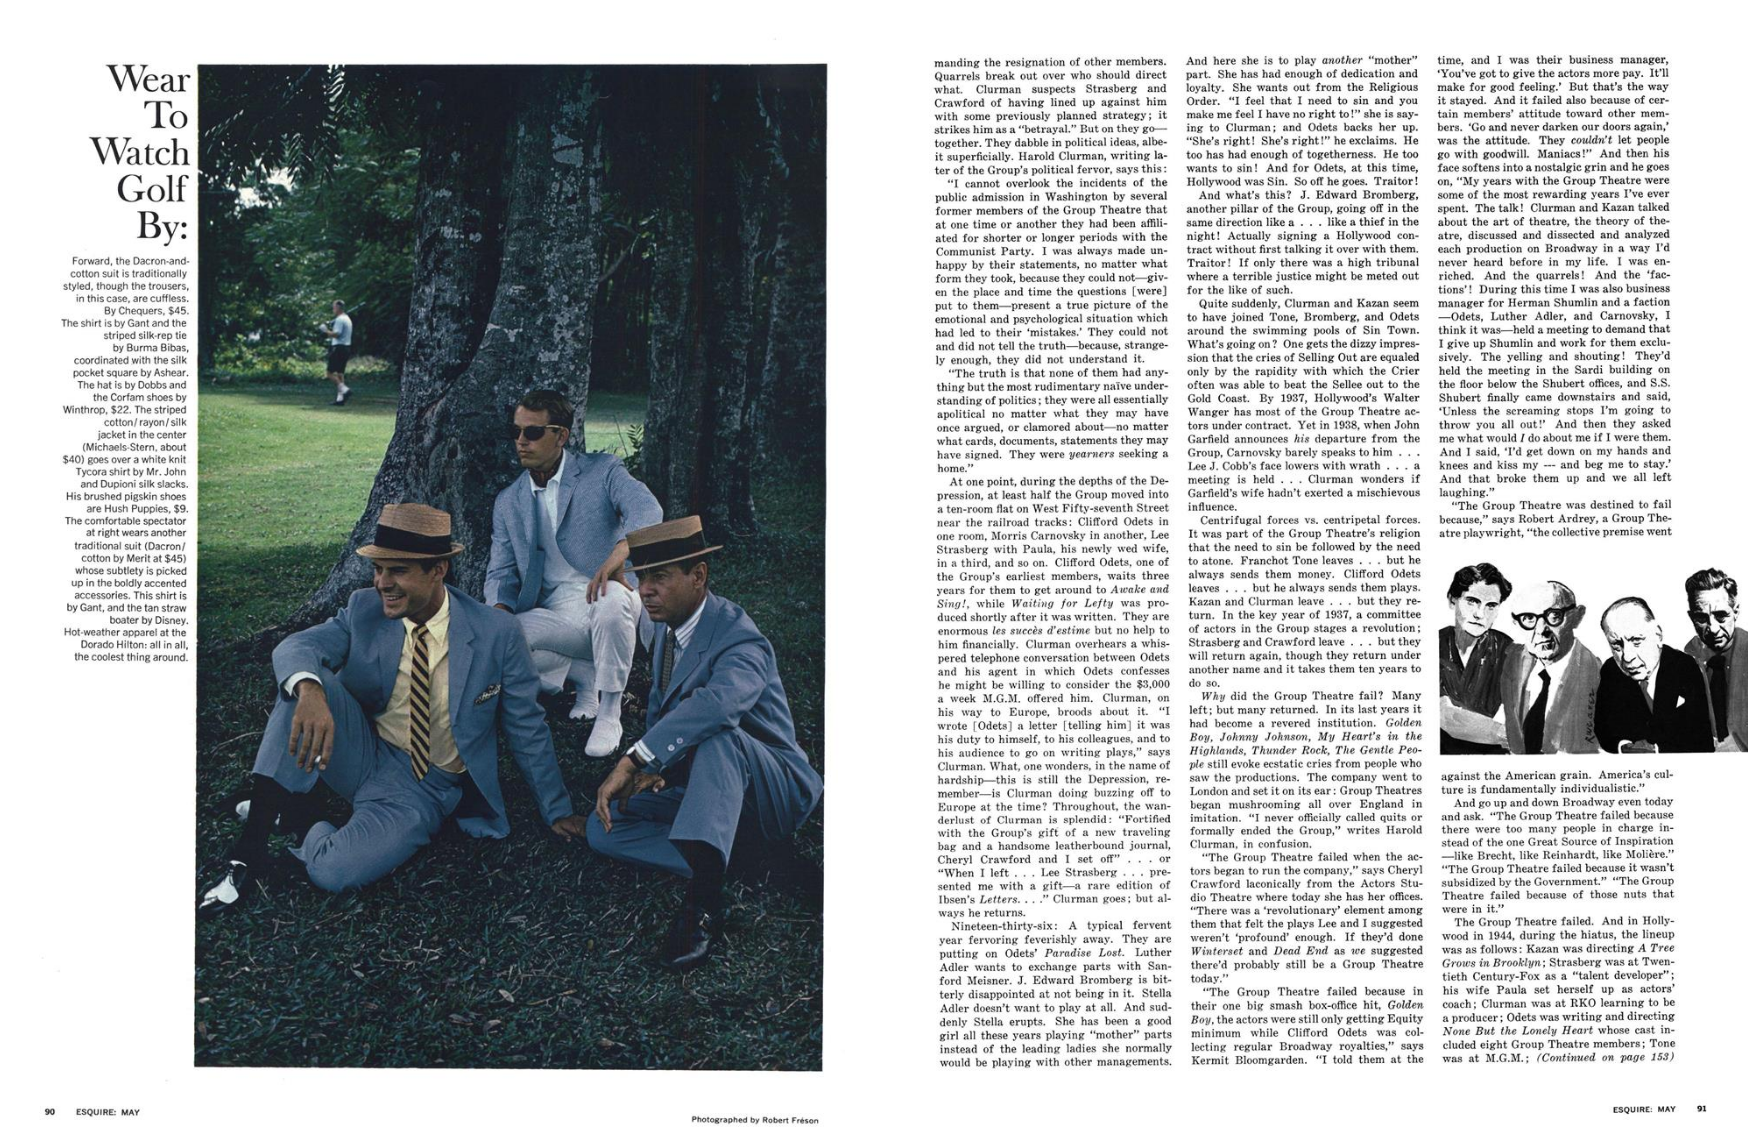 Robert Freson 'Golfers 2', Esquire.png